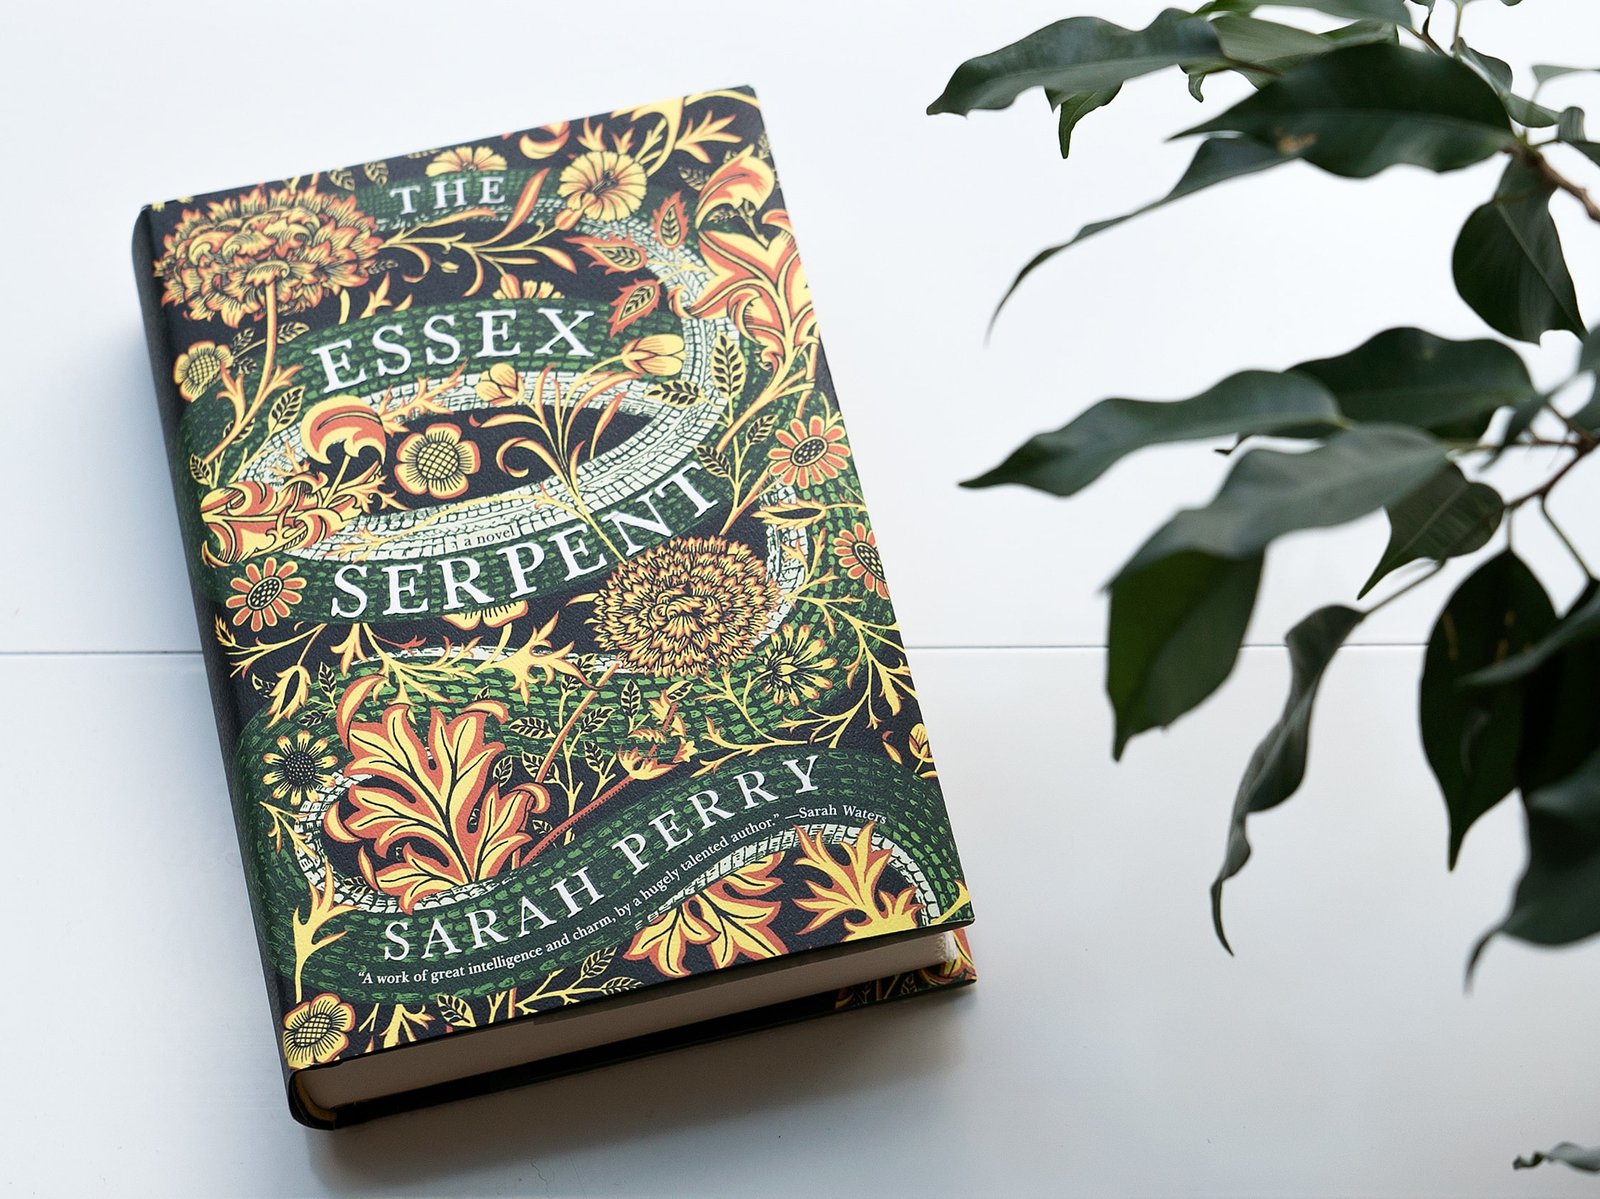 The Book of The Essex Serpent